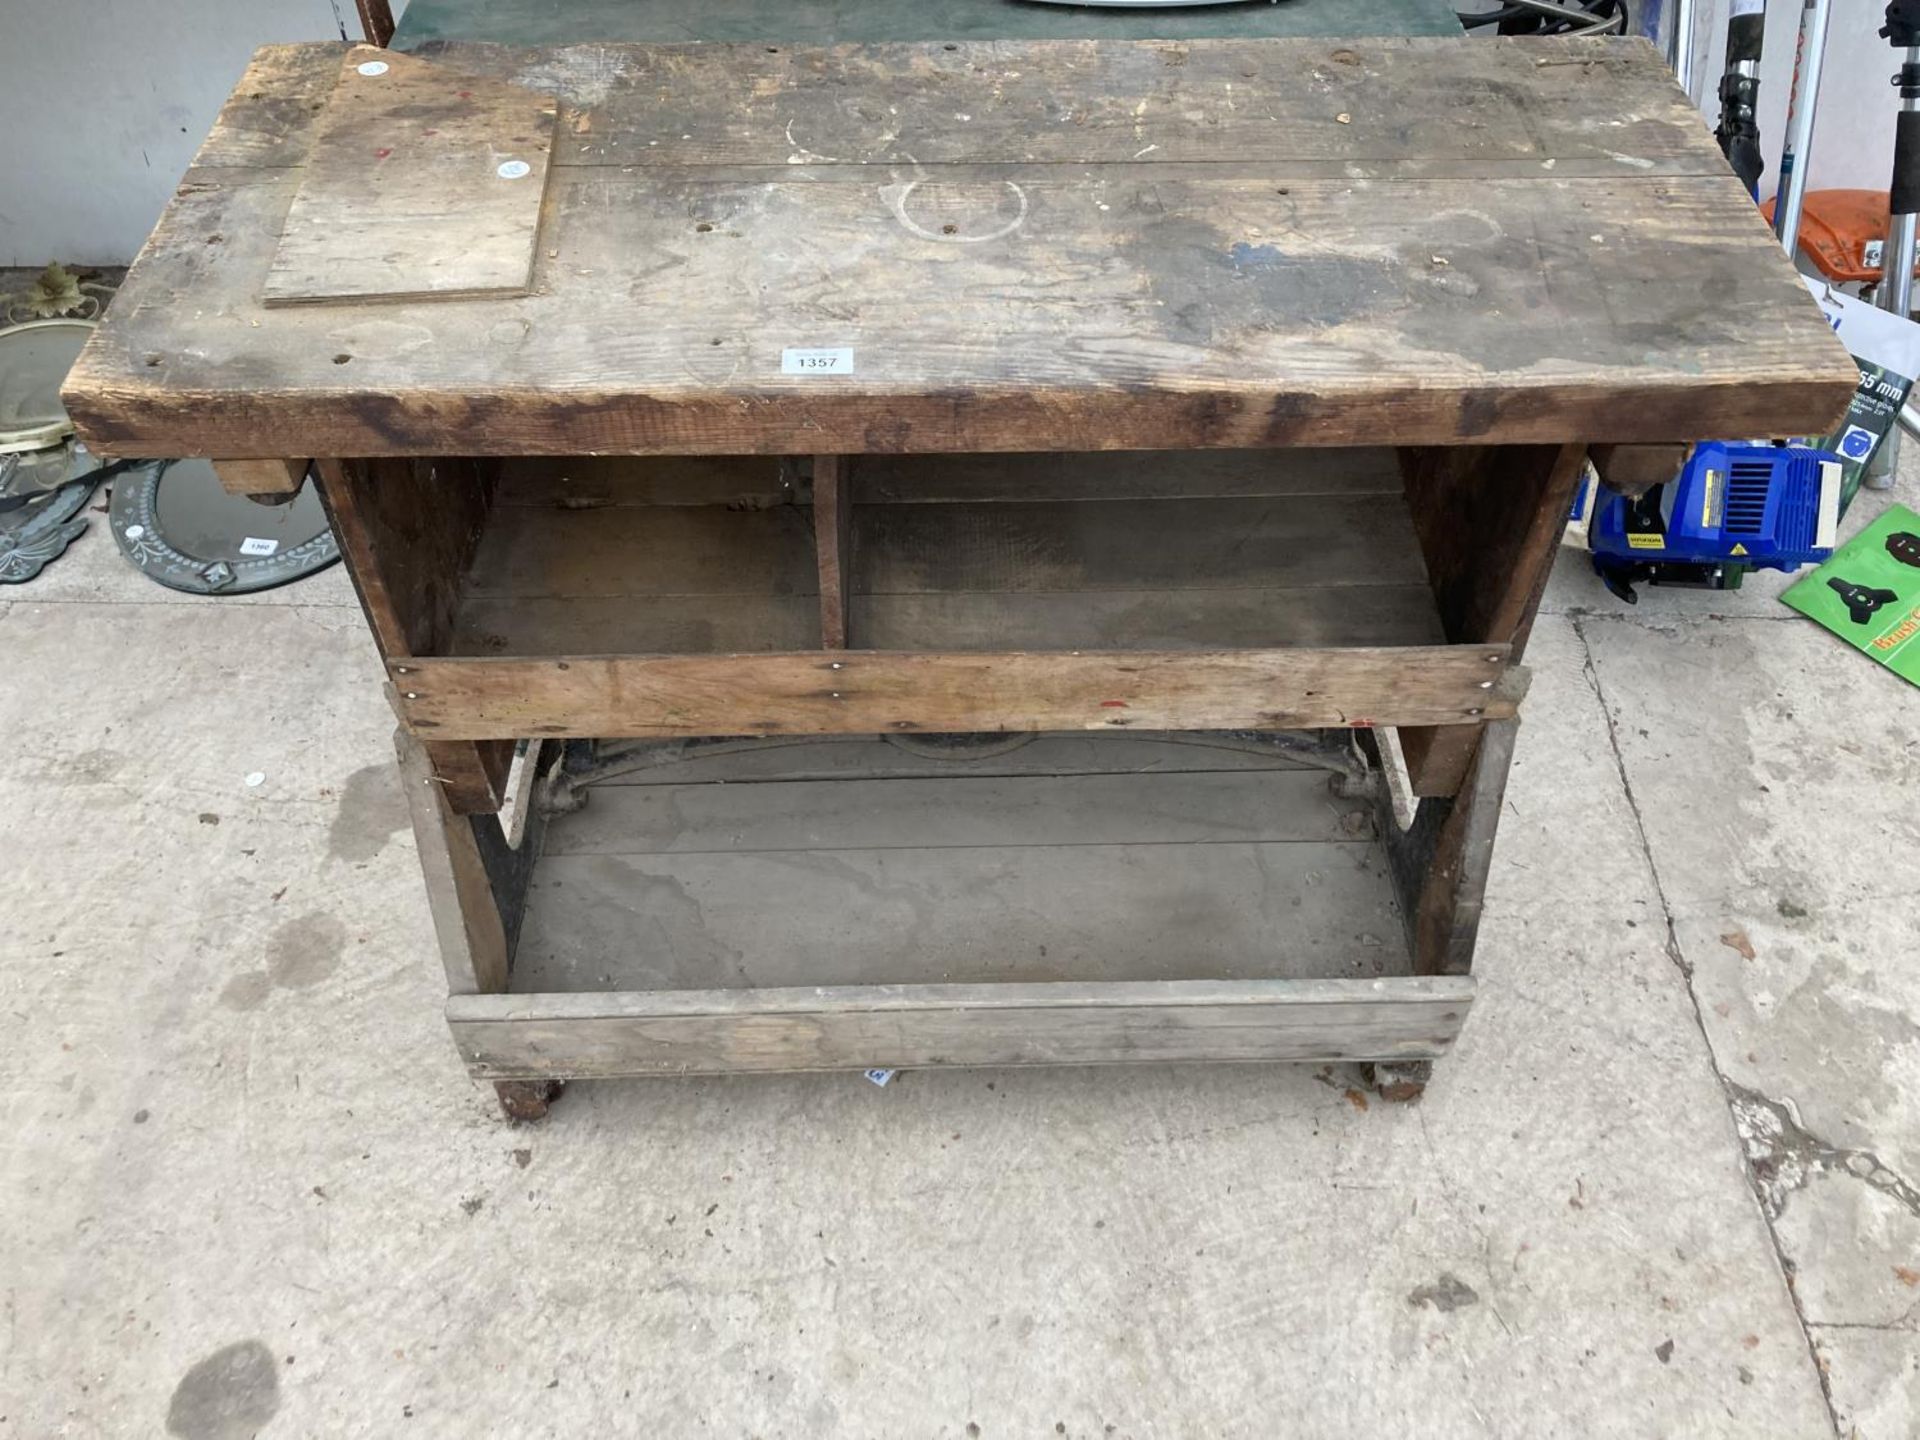 A VINTAGE WOODEN WORK BENCH WITH CAST IRON WHEELED BASE